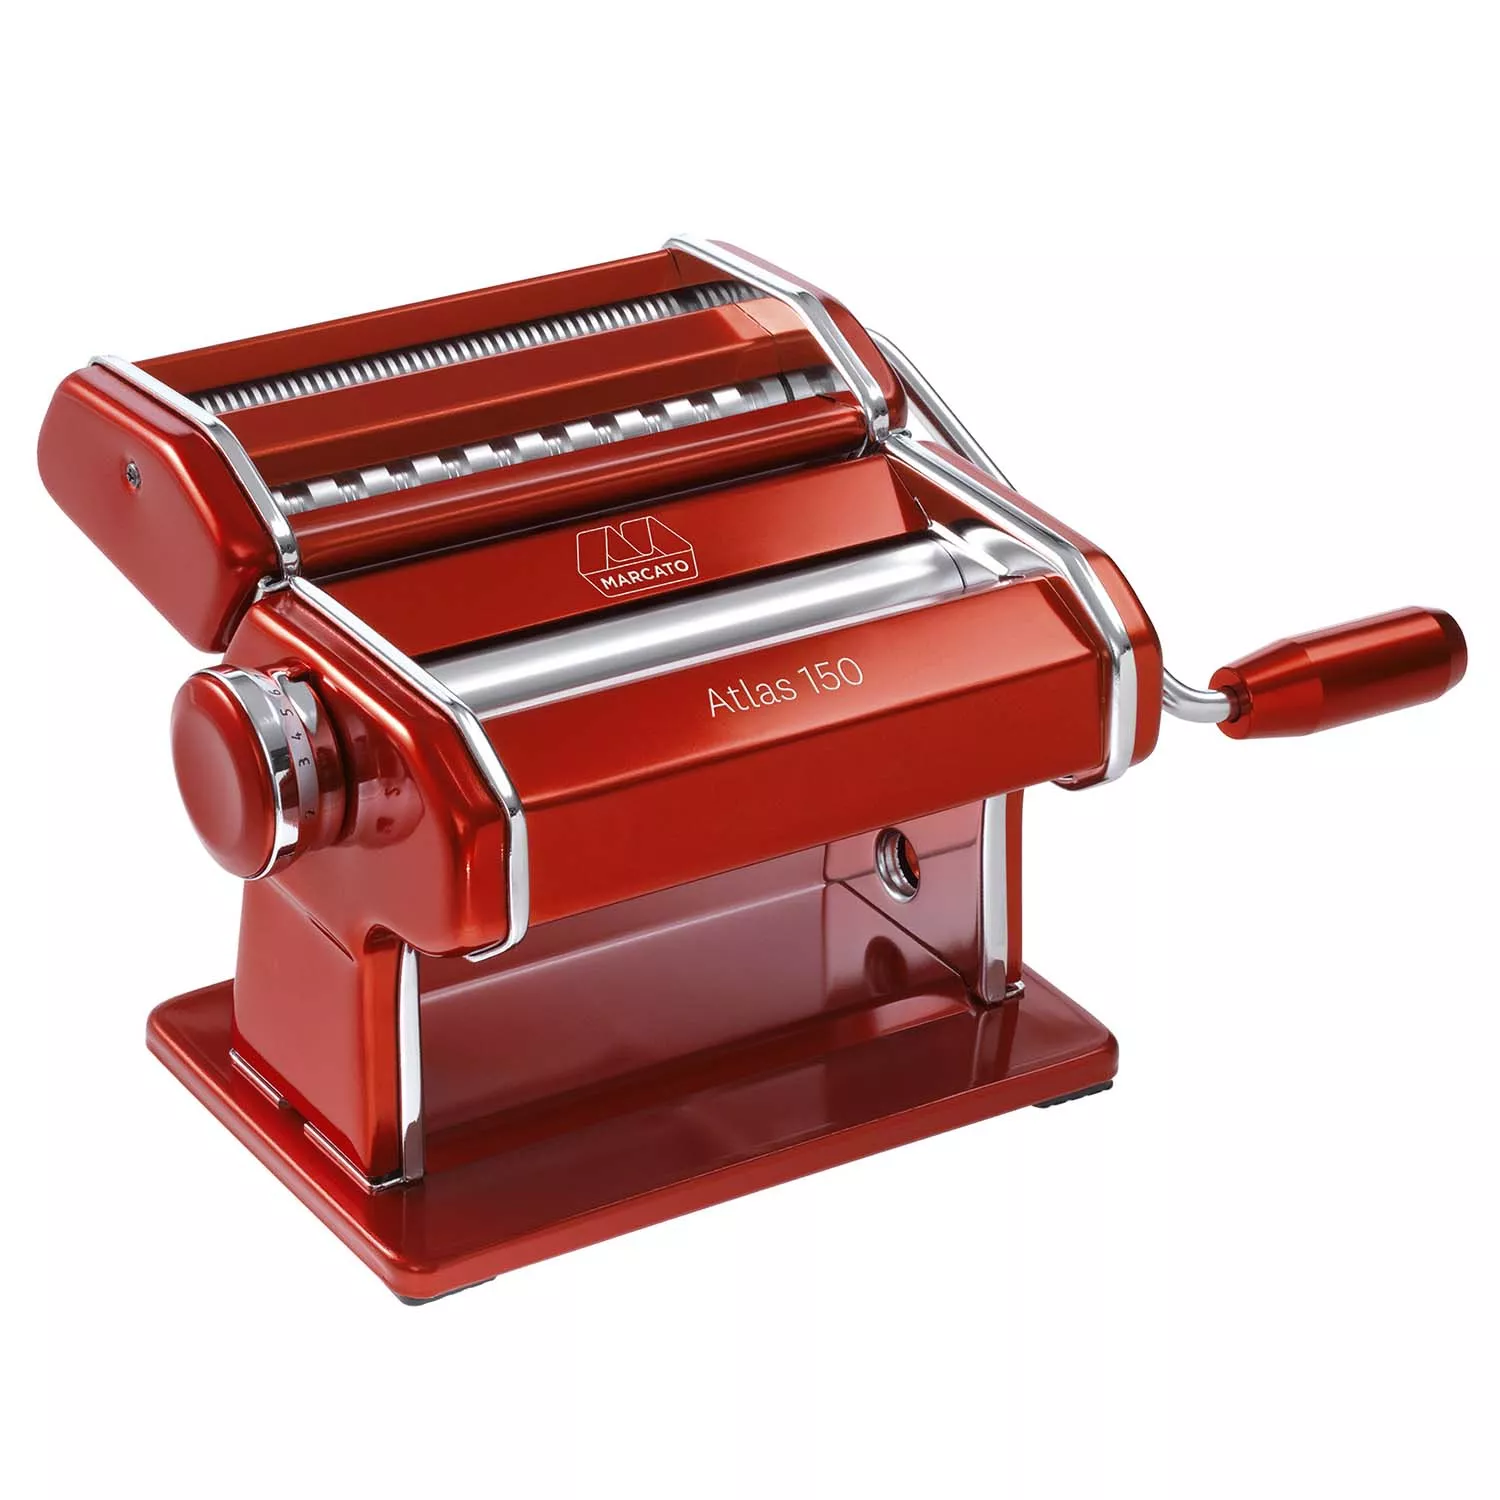 Marcato Atlas 150 Pasta Machine, Made in Italy, Red, Includes